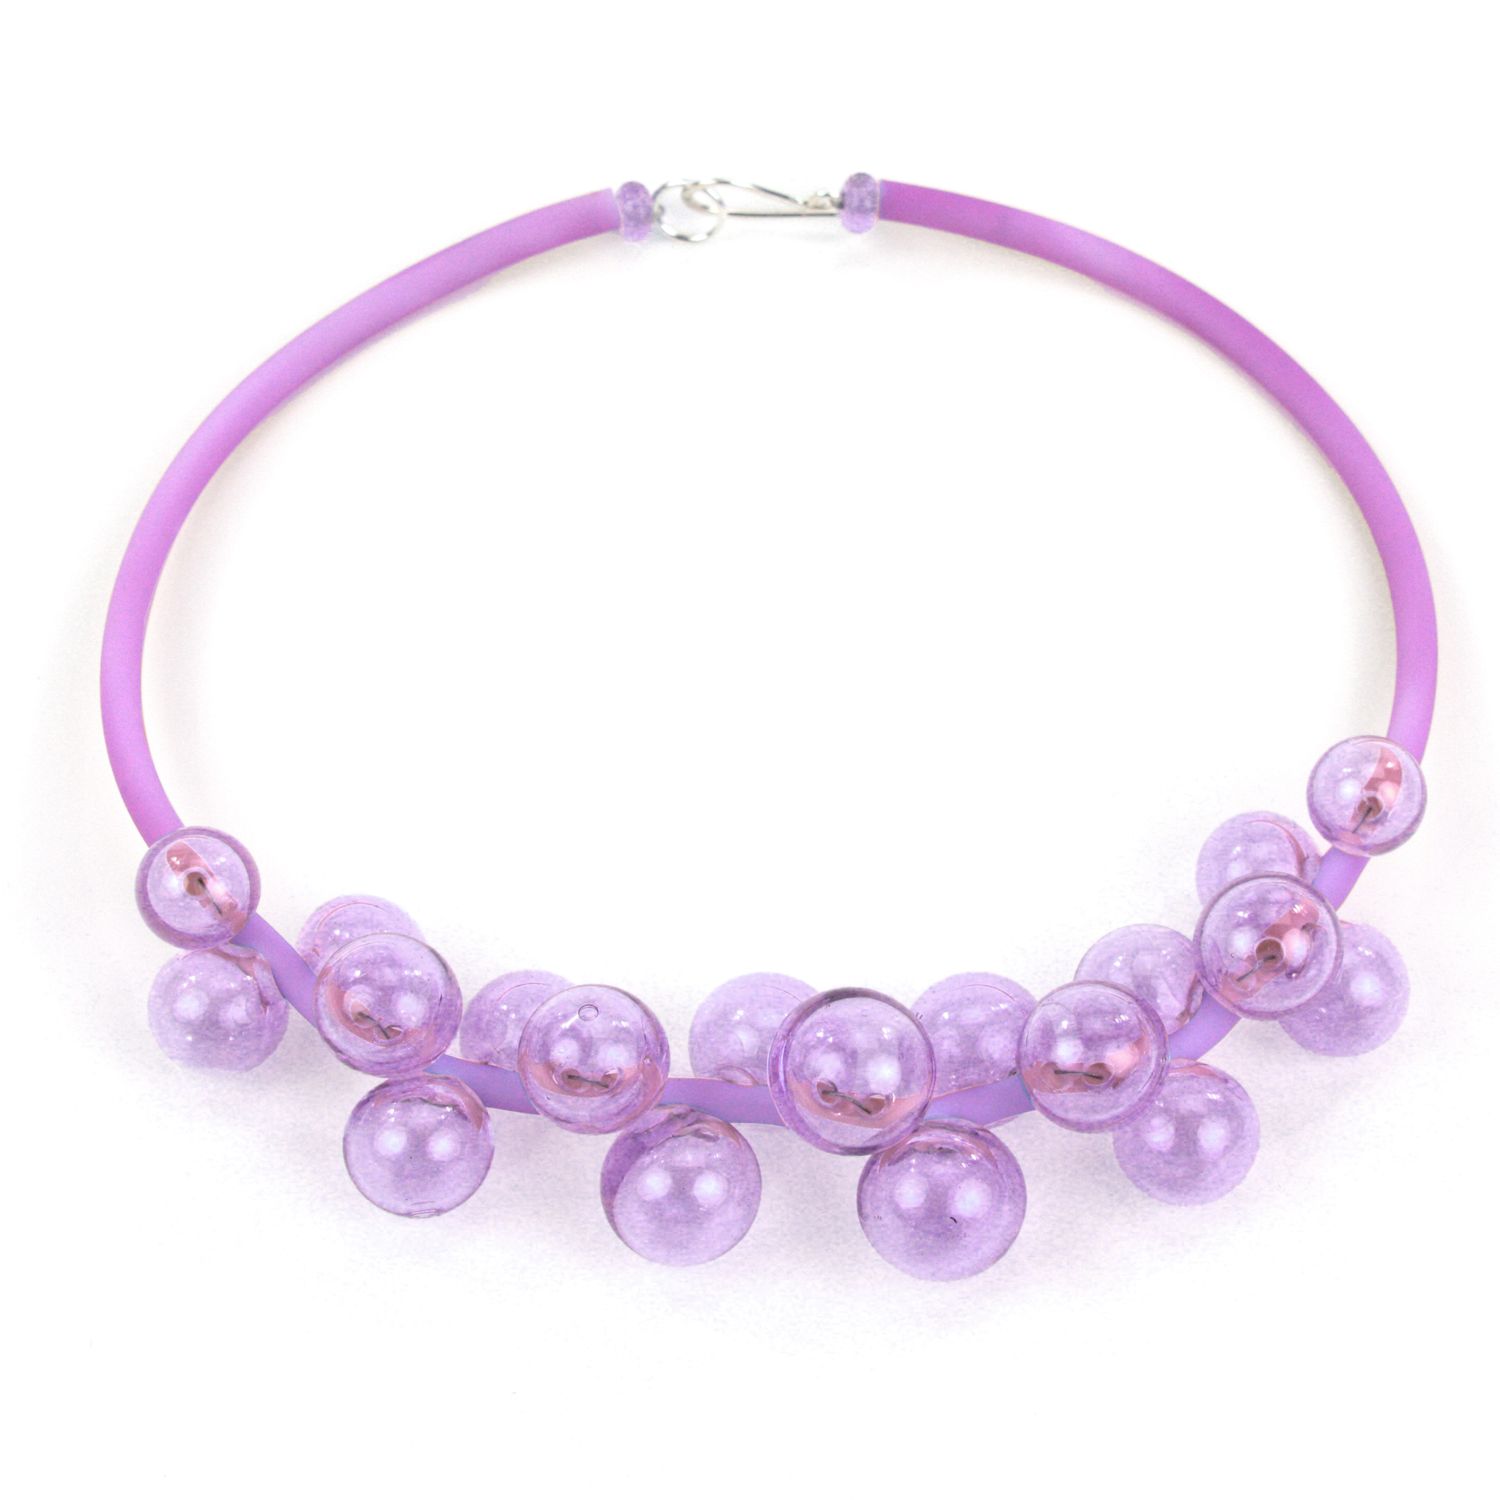 Alicia Niles: Chroma Bolla Necklace – Blue/Purple changing colour Product Image 4 of 6